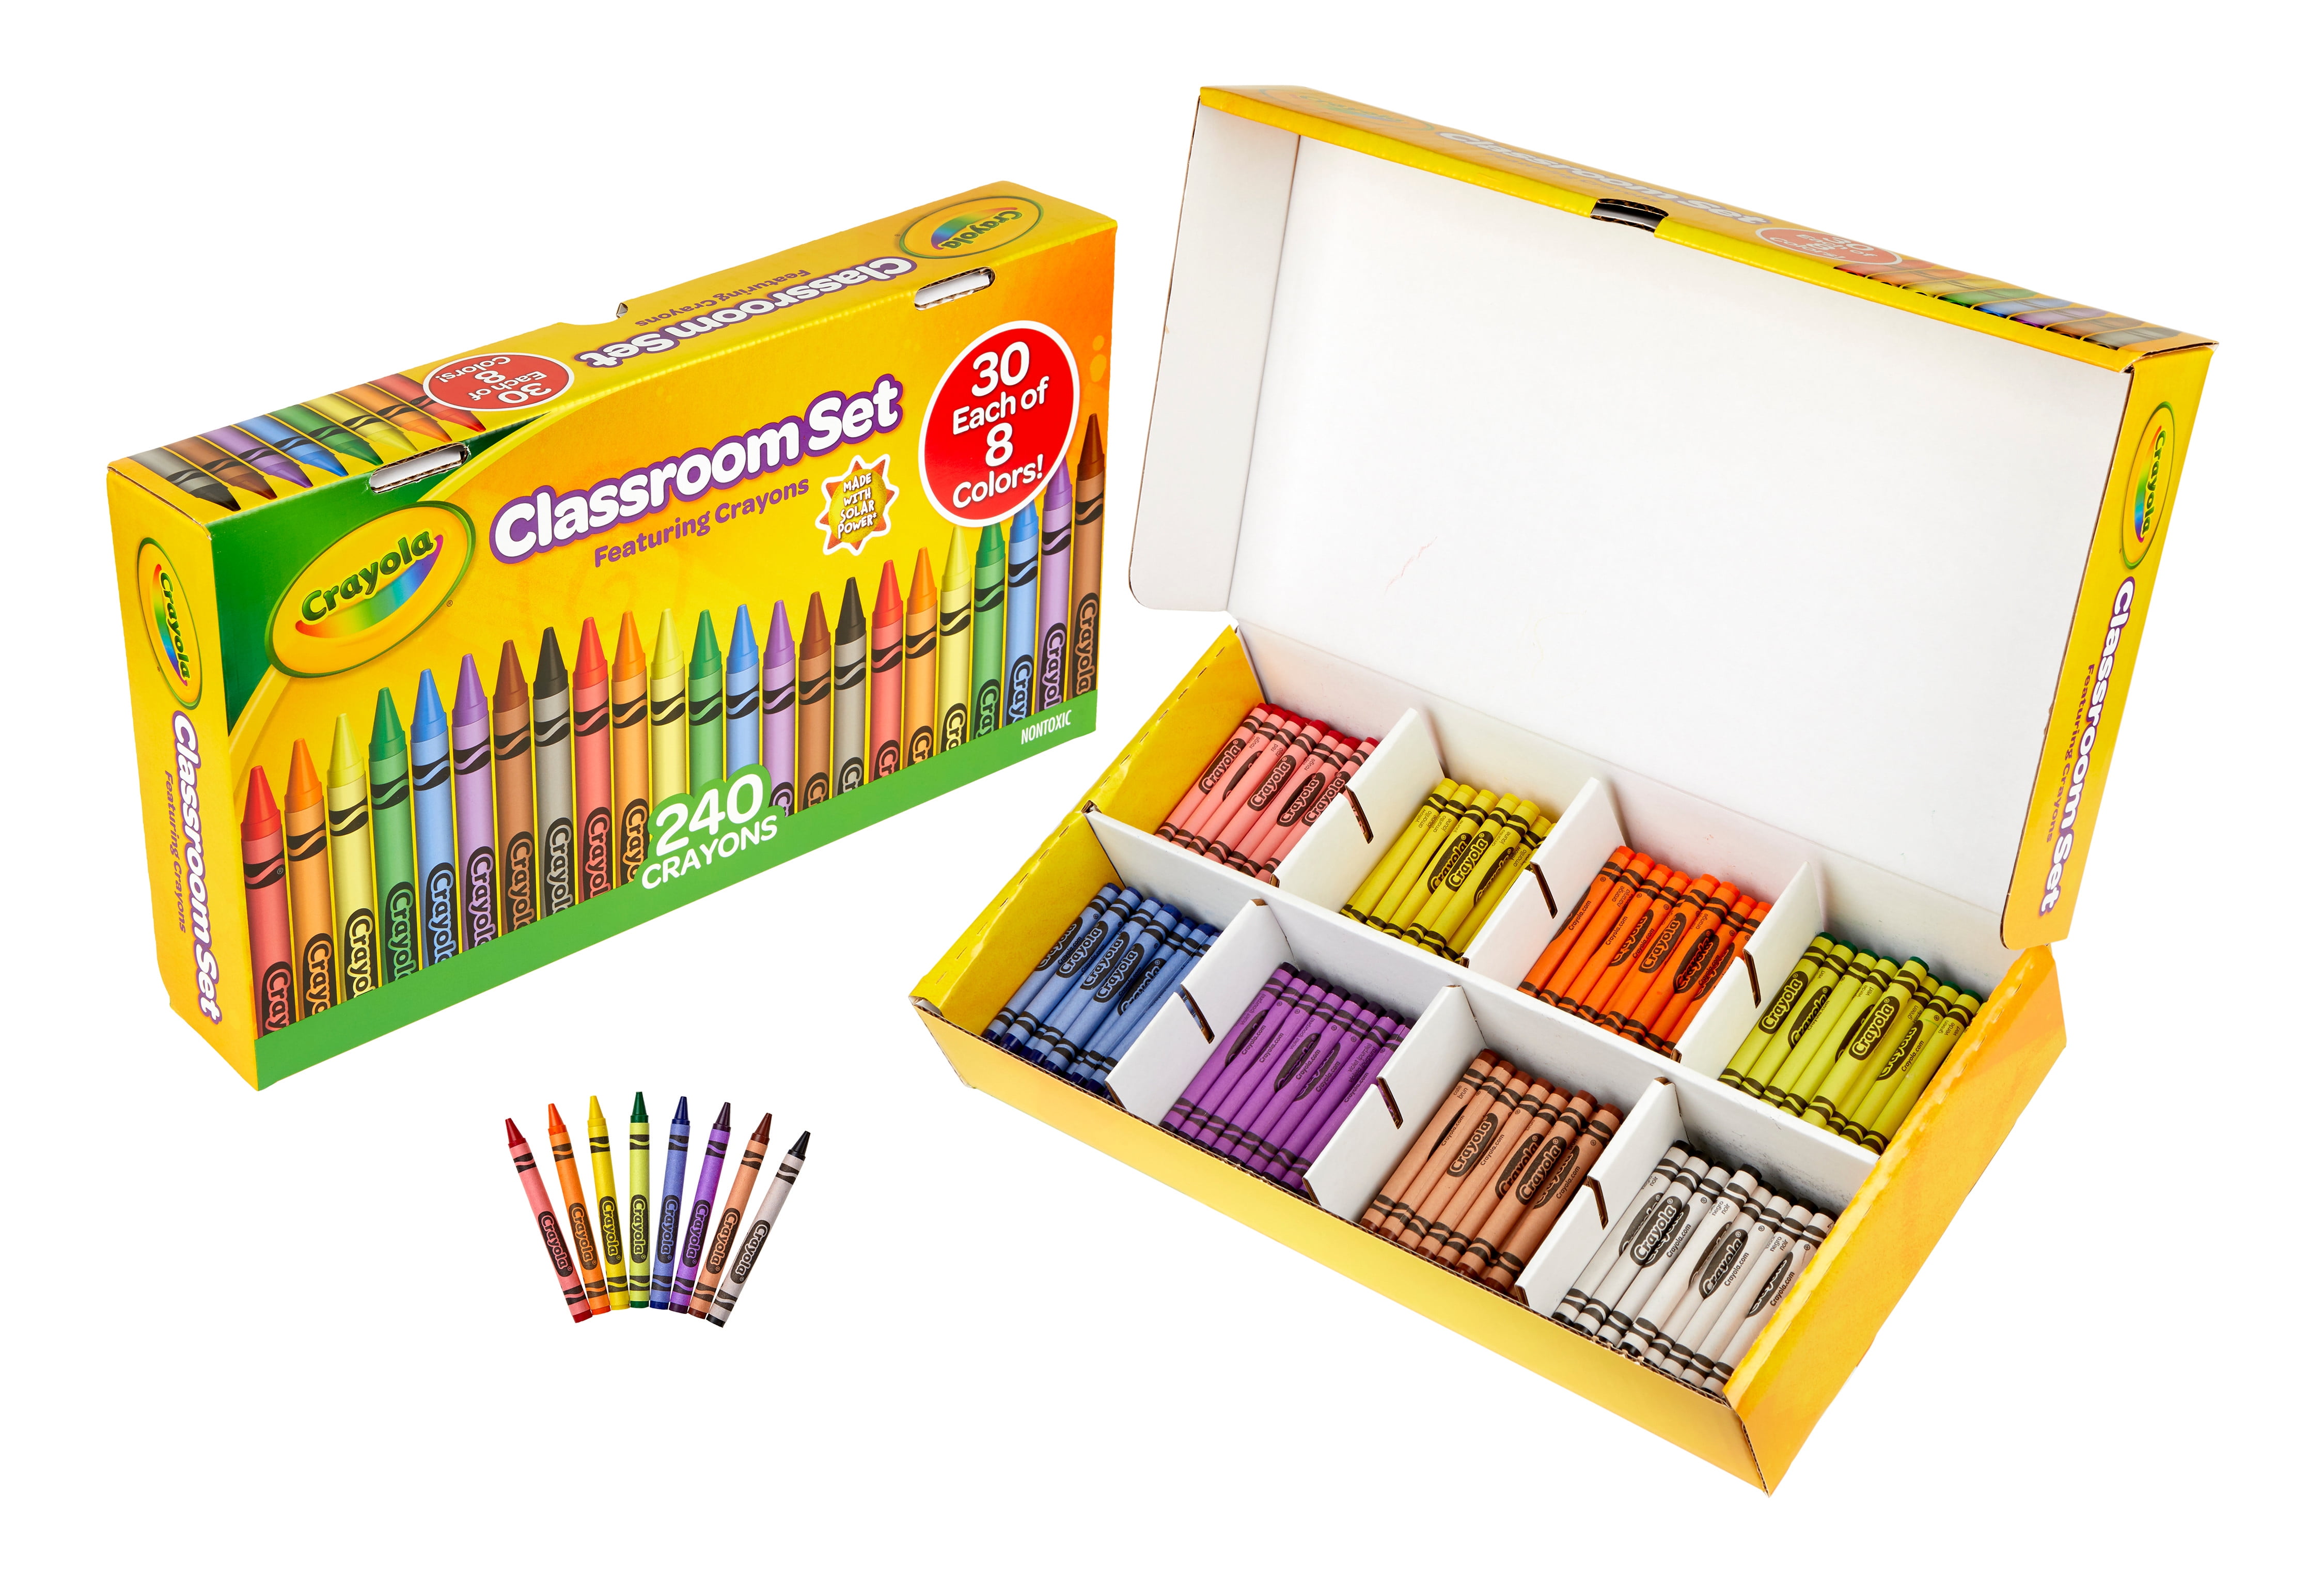 Crayola 520774 Classic 3-Count Assorted Classroom Crayons in Cello